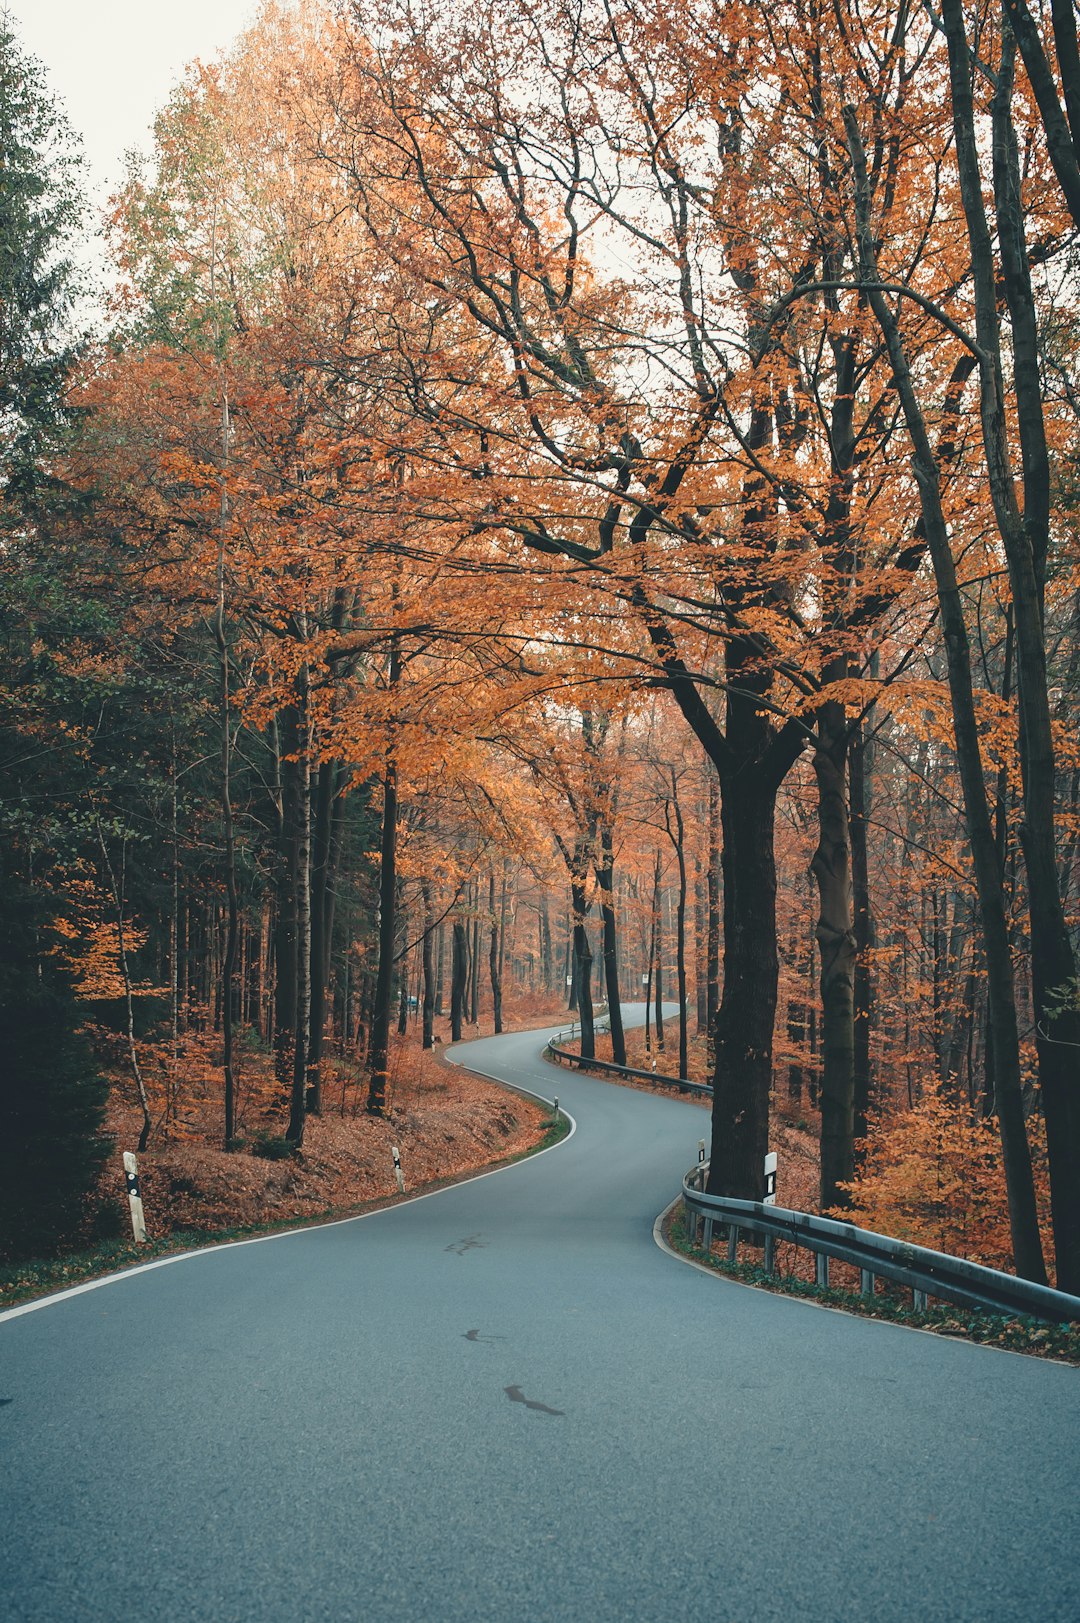 Autumn Scenery Pictures | Download Free Images on Unsplash